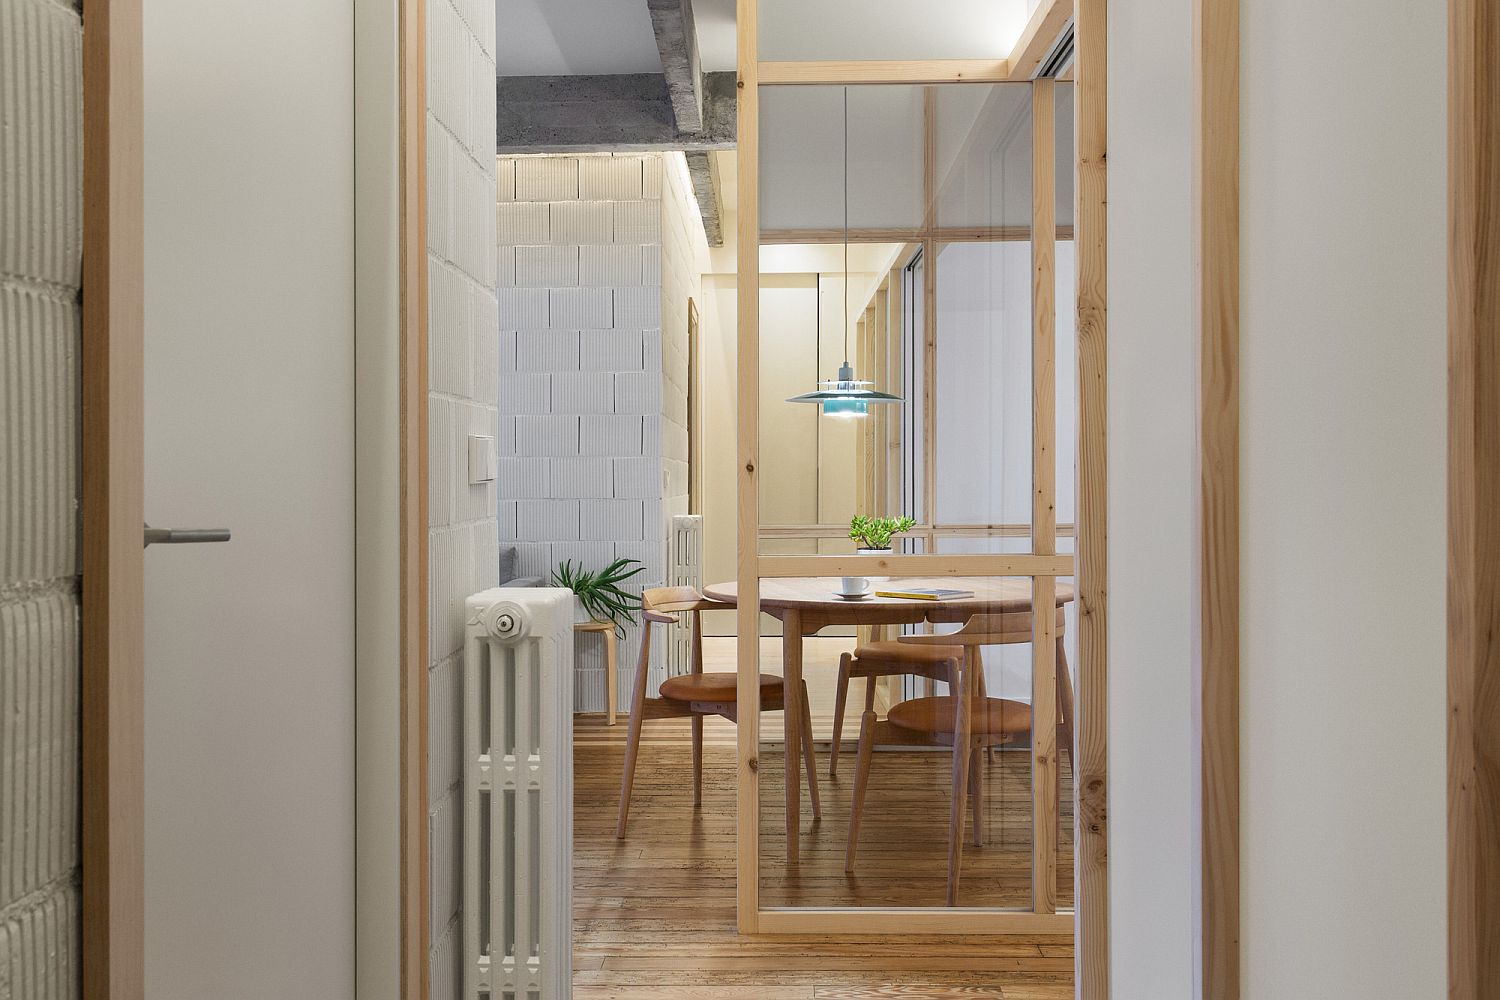 Wooden-partitions-revamp-the-interior-of-this-modest-Spanish-apartment